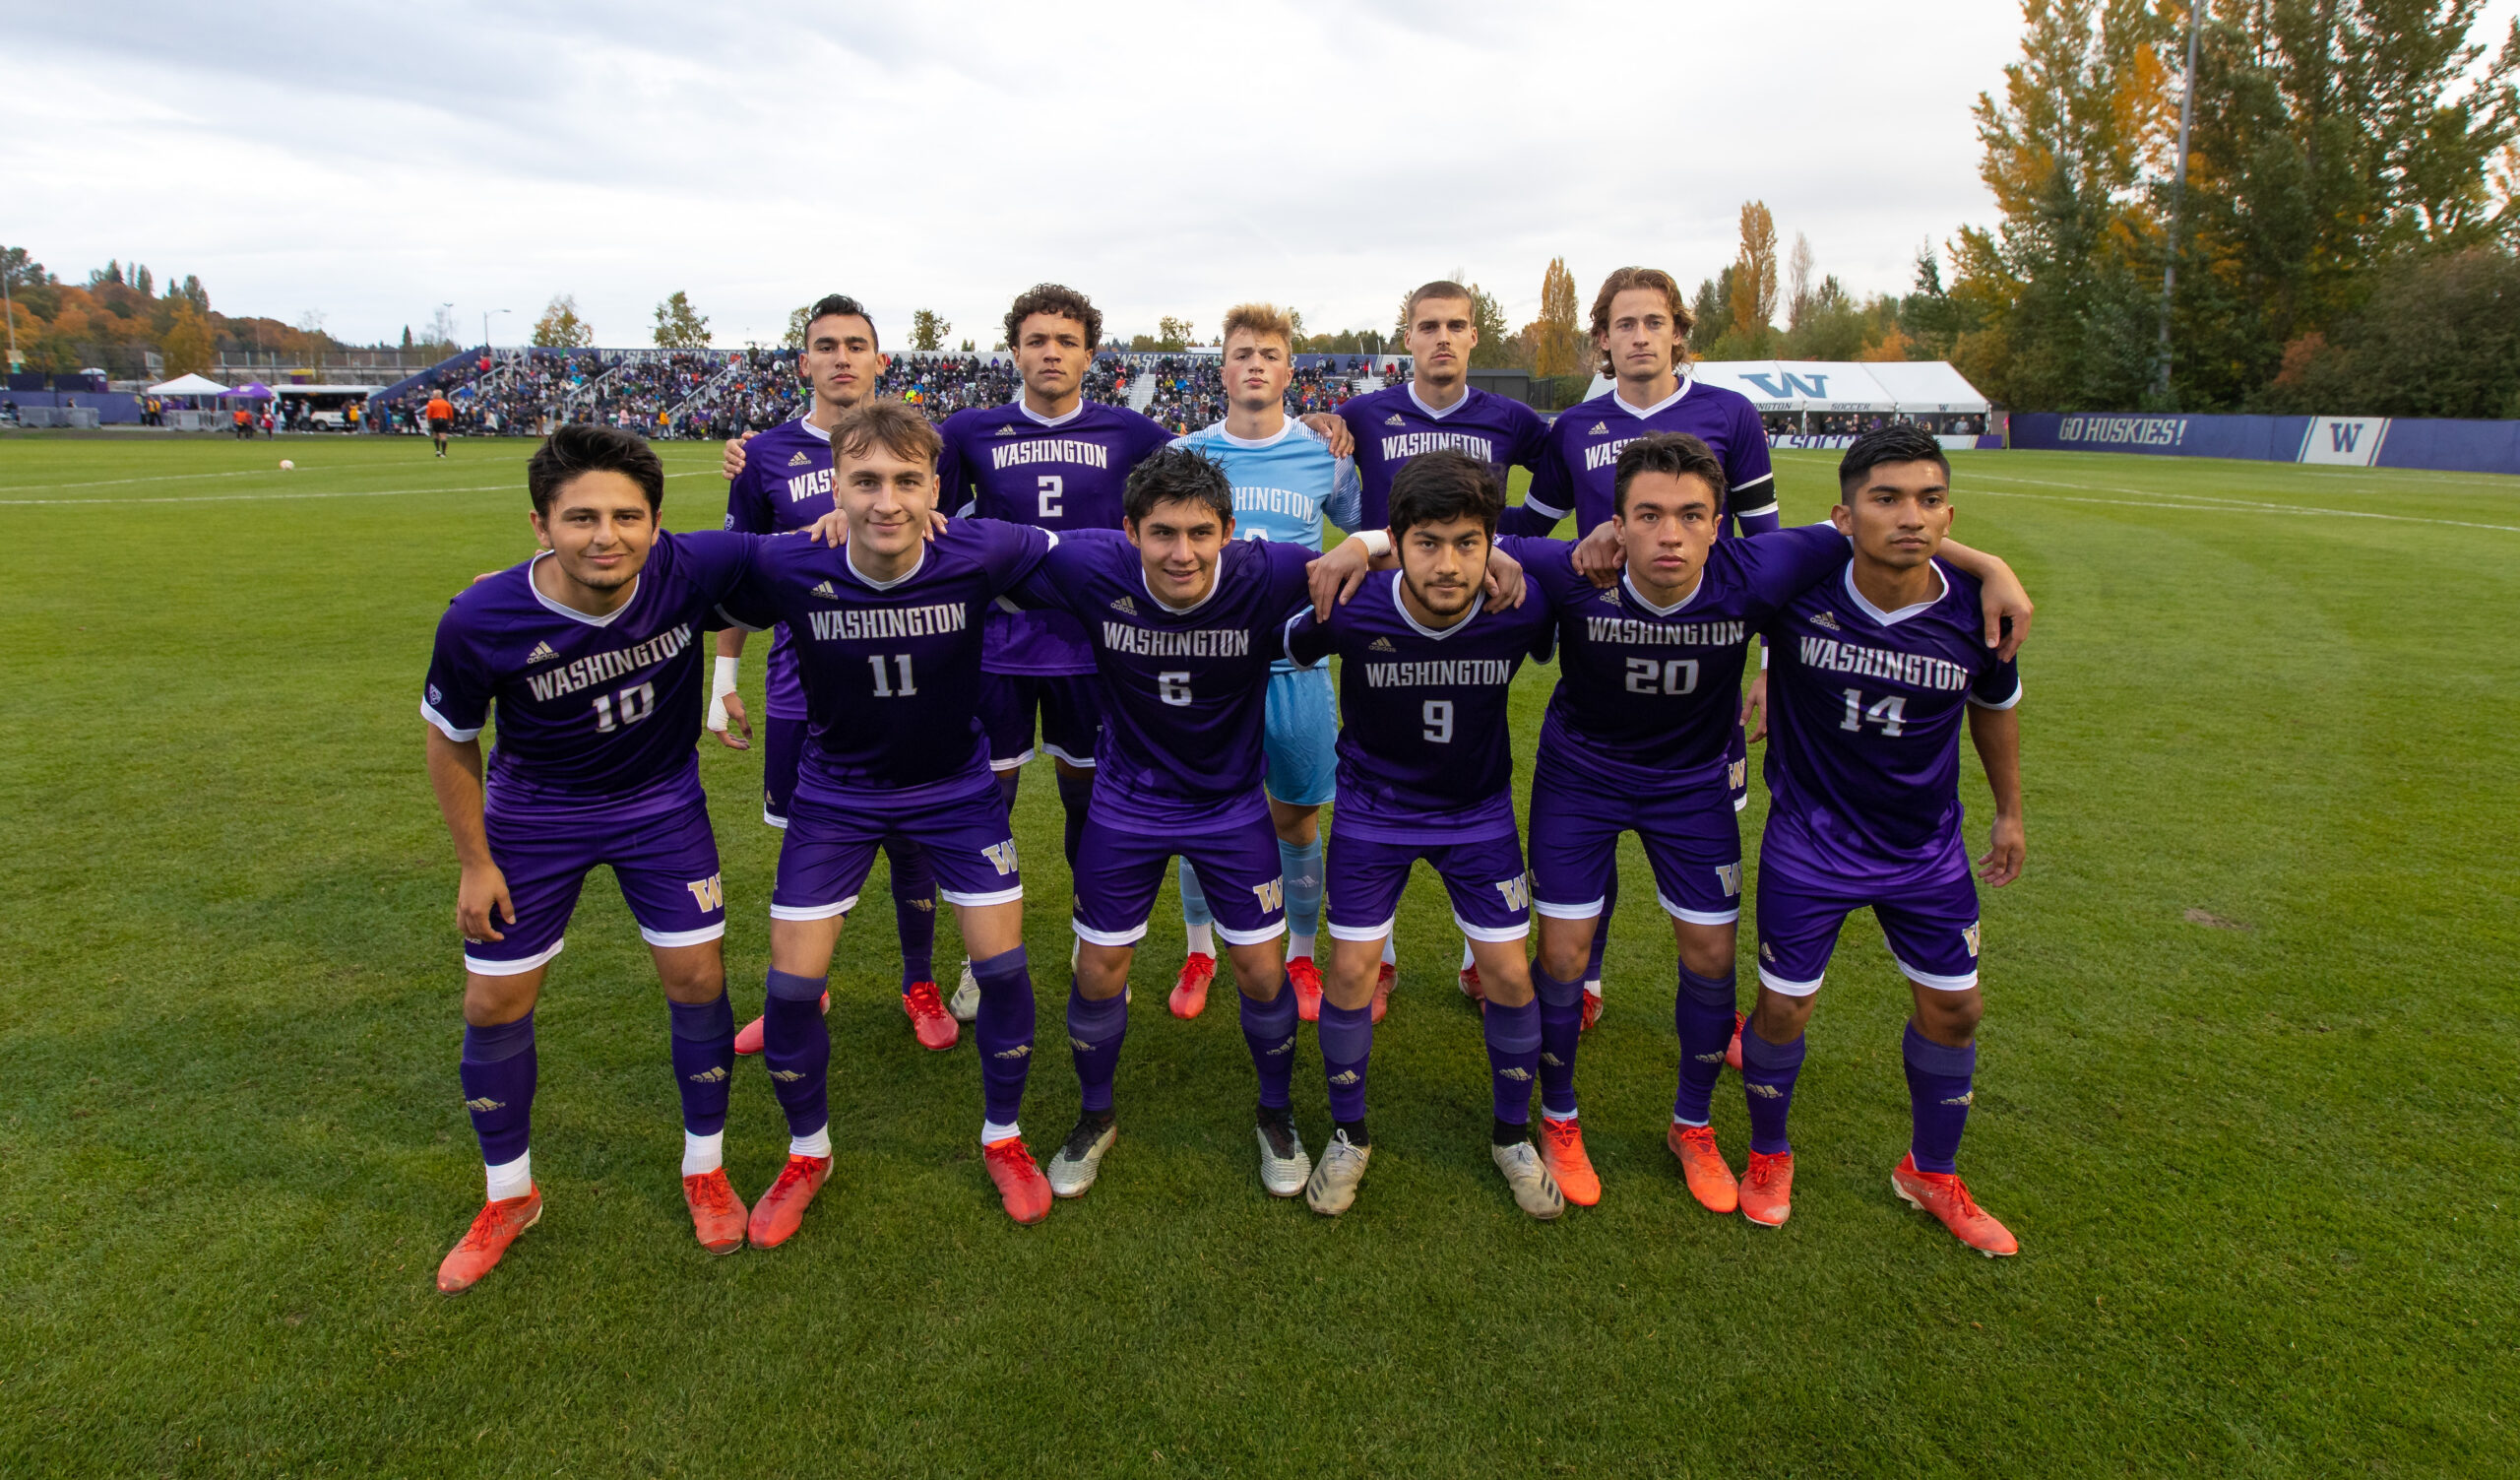 The University of Washington men's soccer team plays Oregon State on October 22, 2021. (Photography by Scott Eklund/Red Box Pictures)